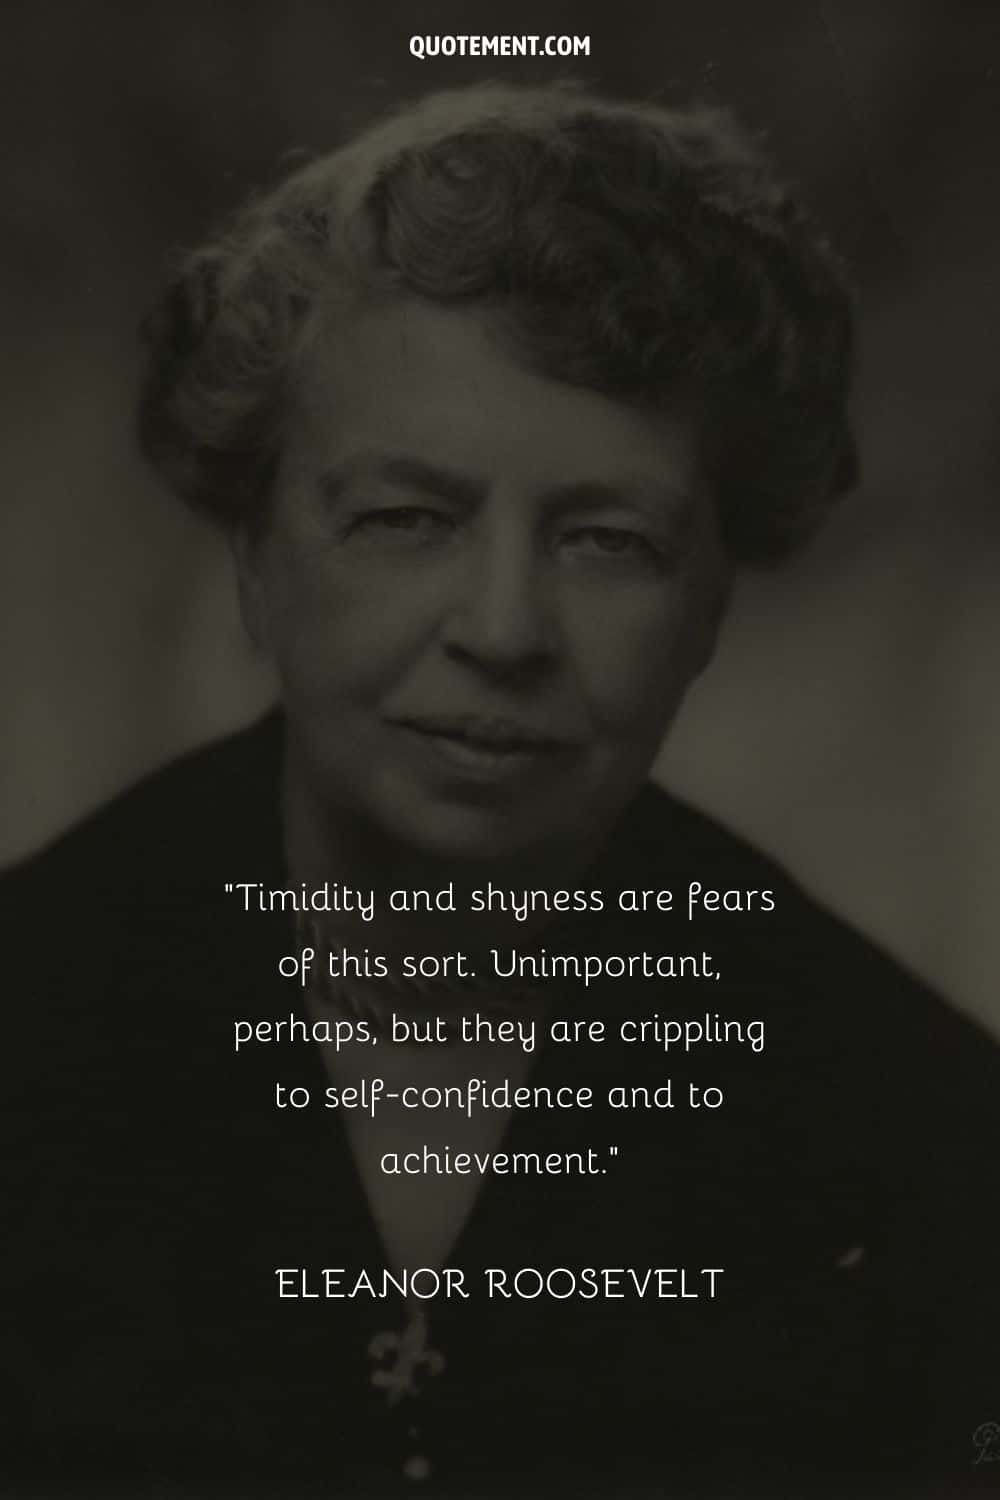 “Timidity and shyness are fears of this sort. Unimportant, perhaps, but they are crippling to self-confidence and to achievement.” ― Eleanor Roosevelt